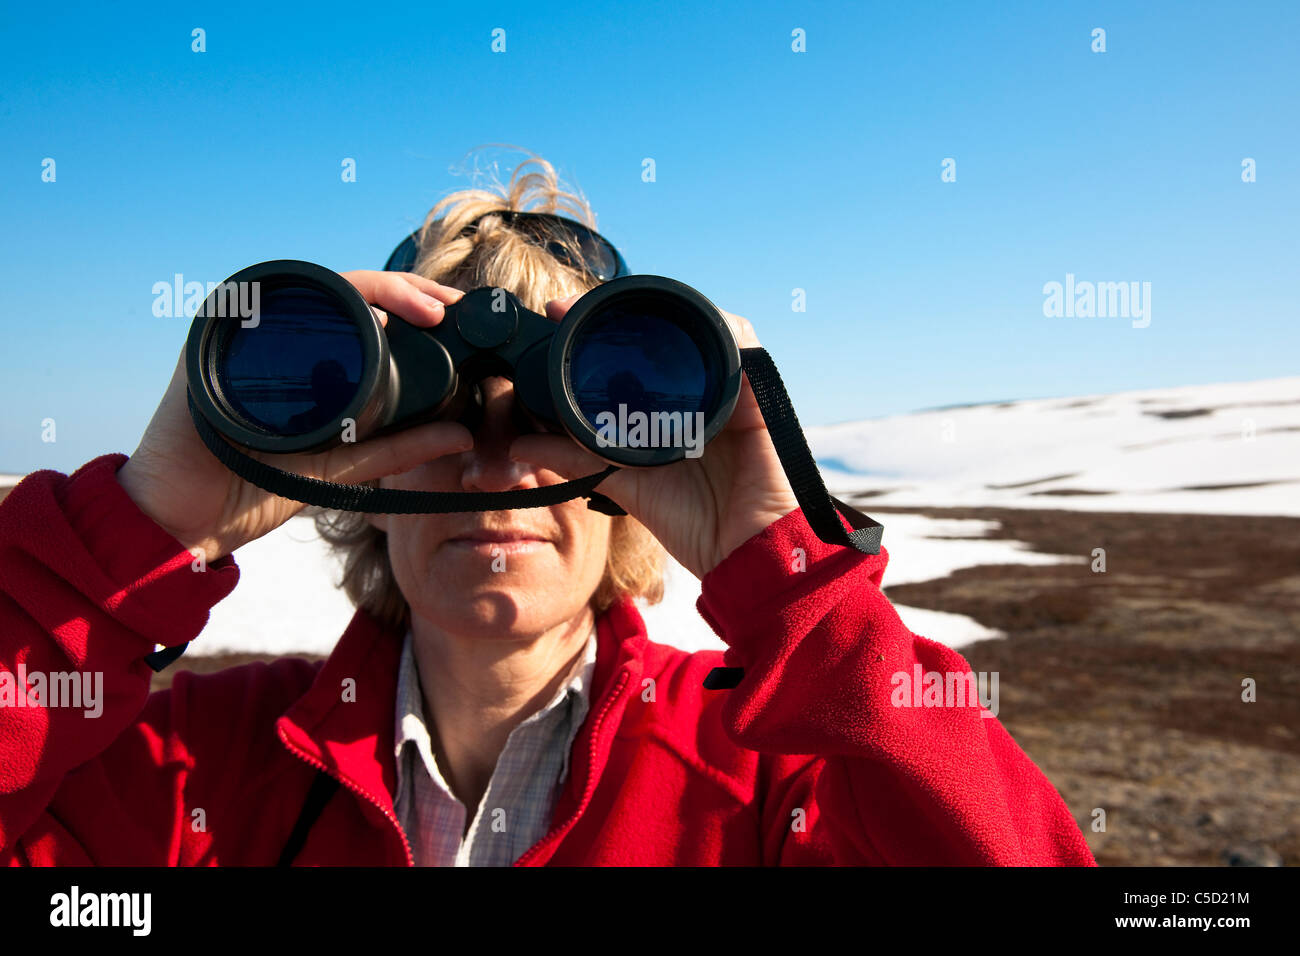 Close-up of a female birdwatcher with binoculars against blue sky Stock Photo